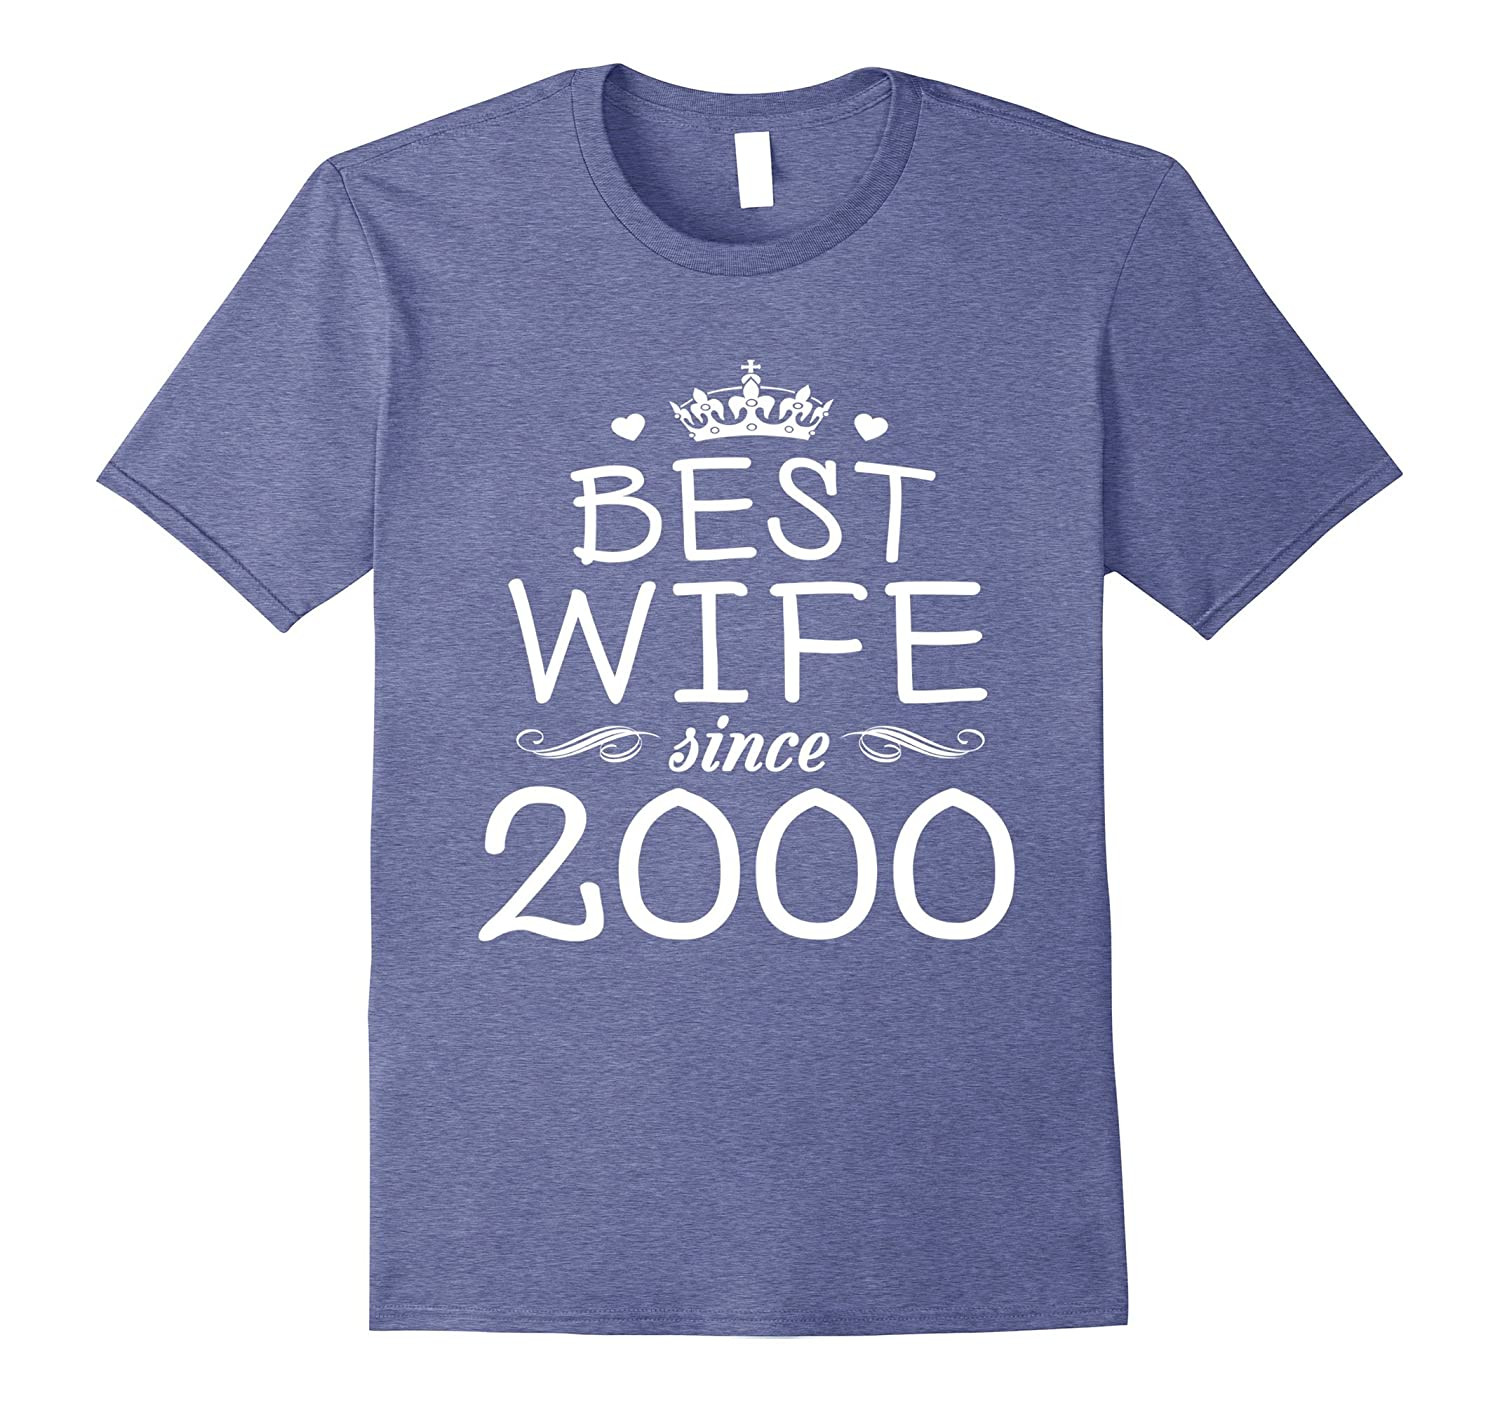 17Th Wedding Anniversary Gift Ideas For Her
 17th Wedding Anniversary Gift Ideas For Her Wife Since